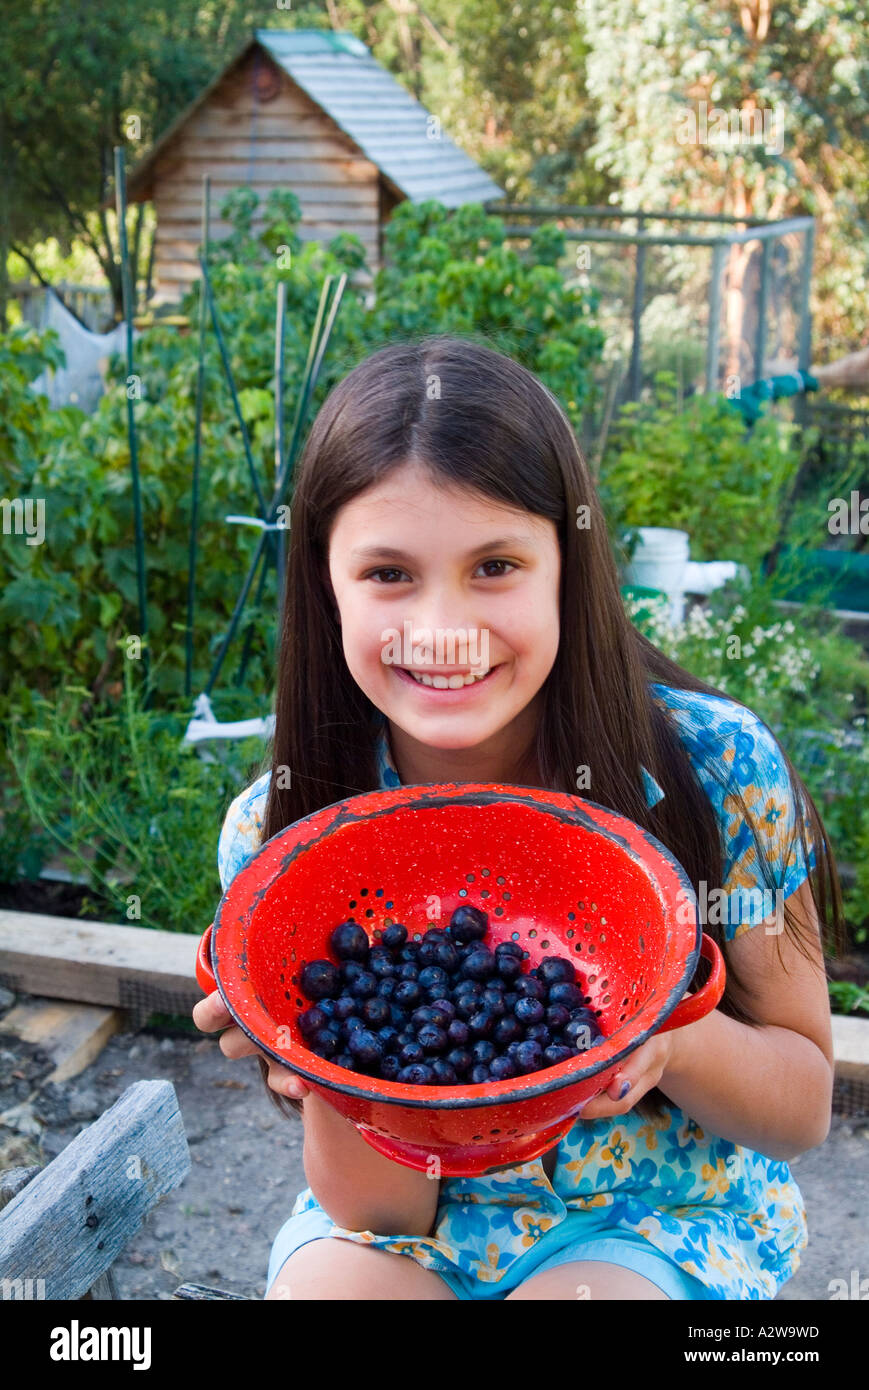 Young girl with red enamel colander of organically grown blueberries Stock Photo